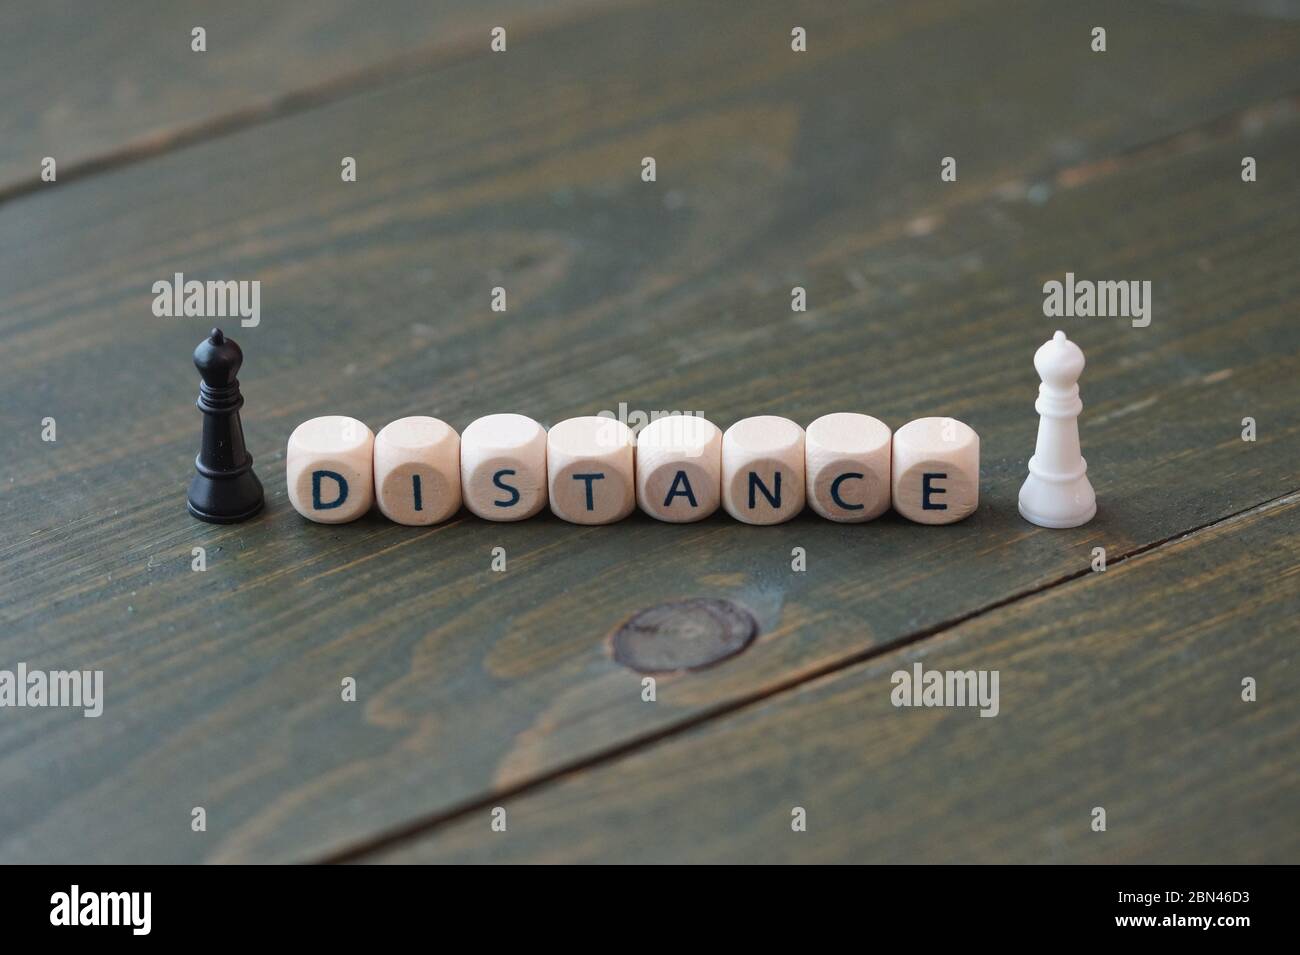 Cube with 'DISTANCE' text and miniature People figures. Conceptual image about social distancing, mandatory due to the coronavirus outbreak, Covid-19. Stock Photo